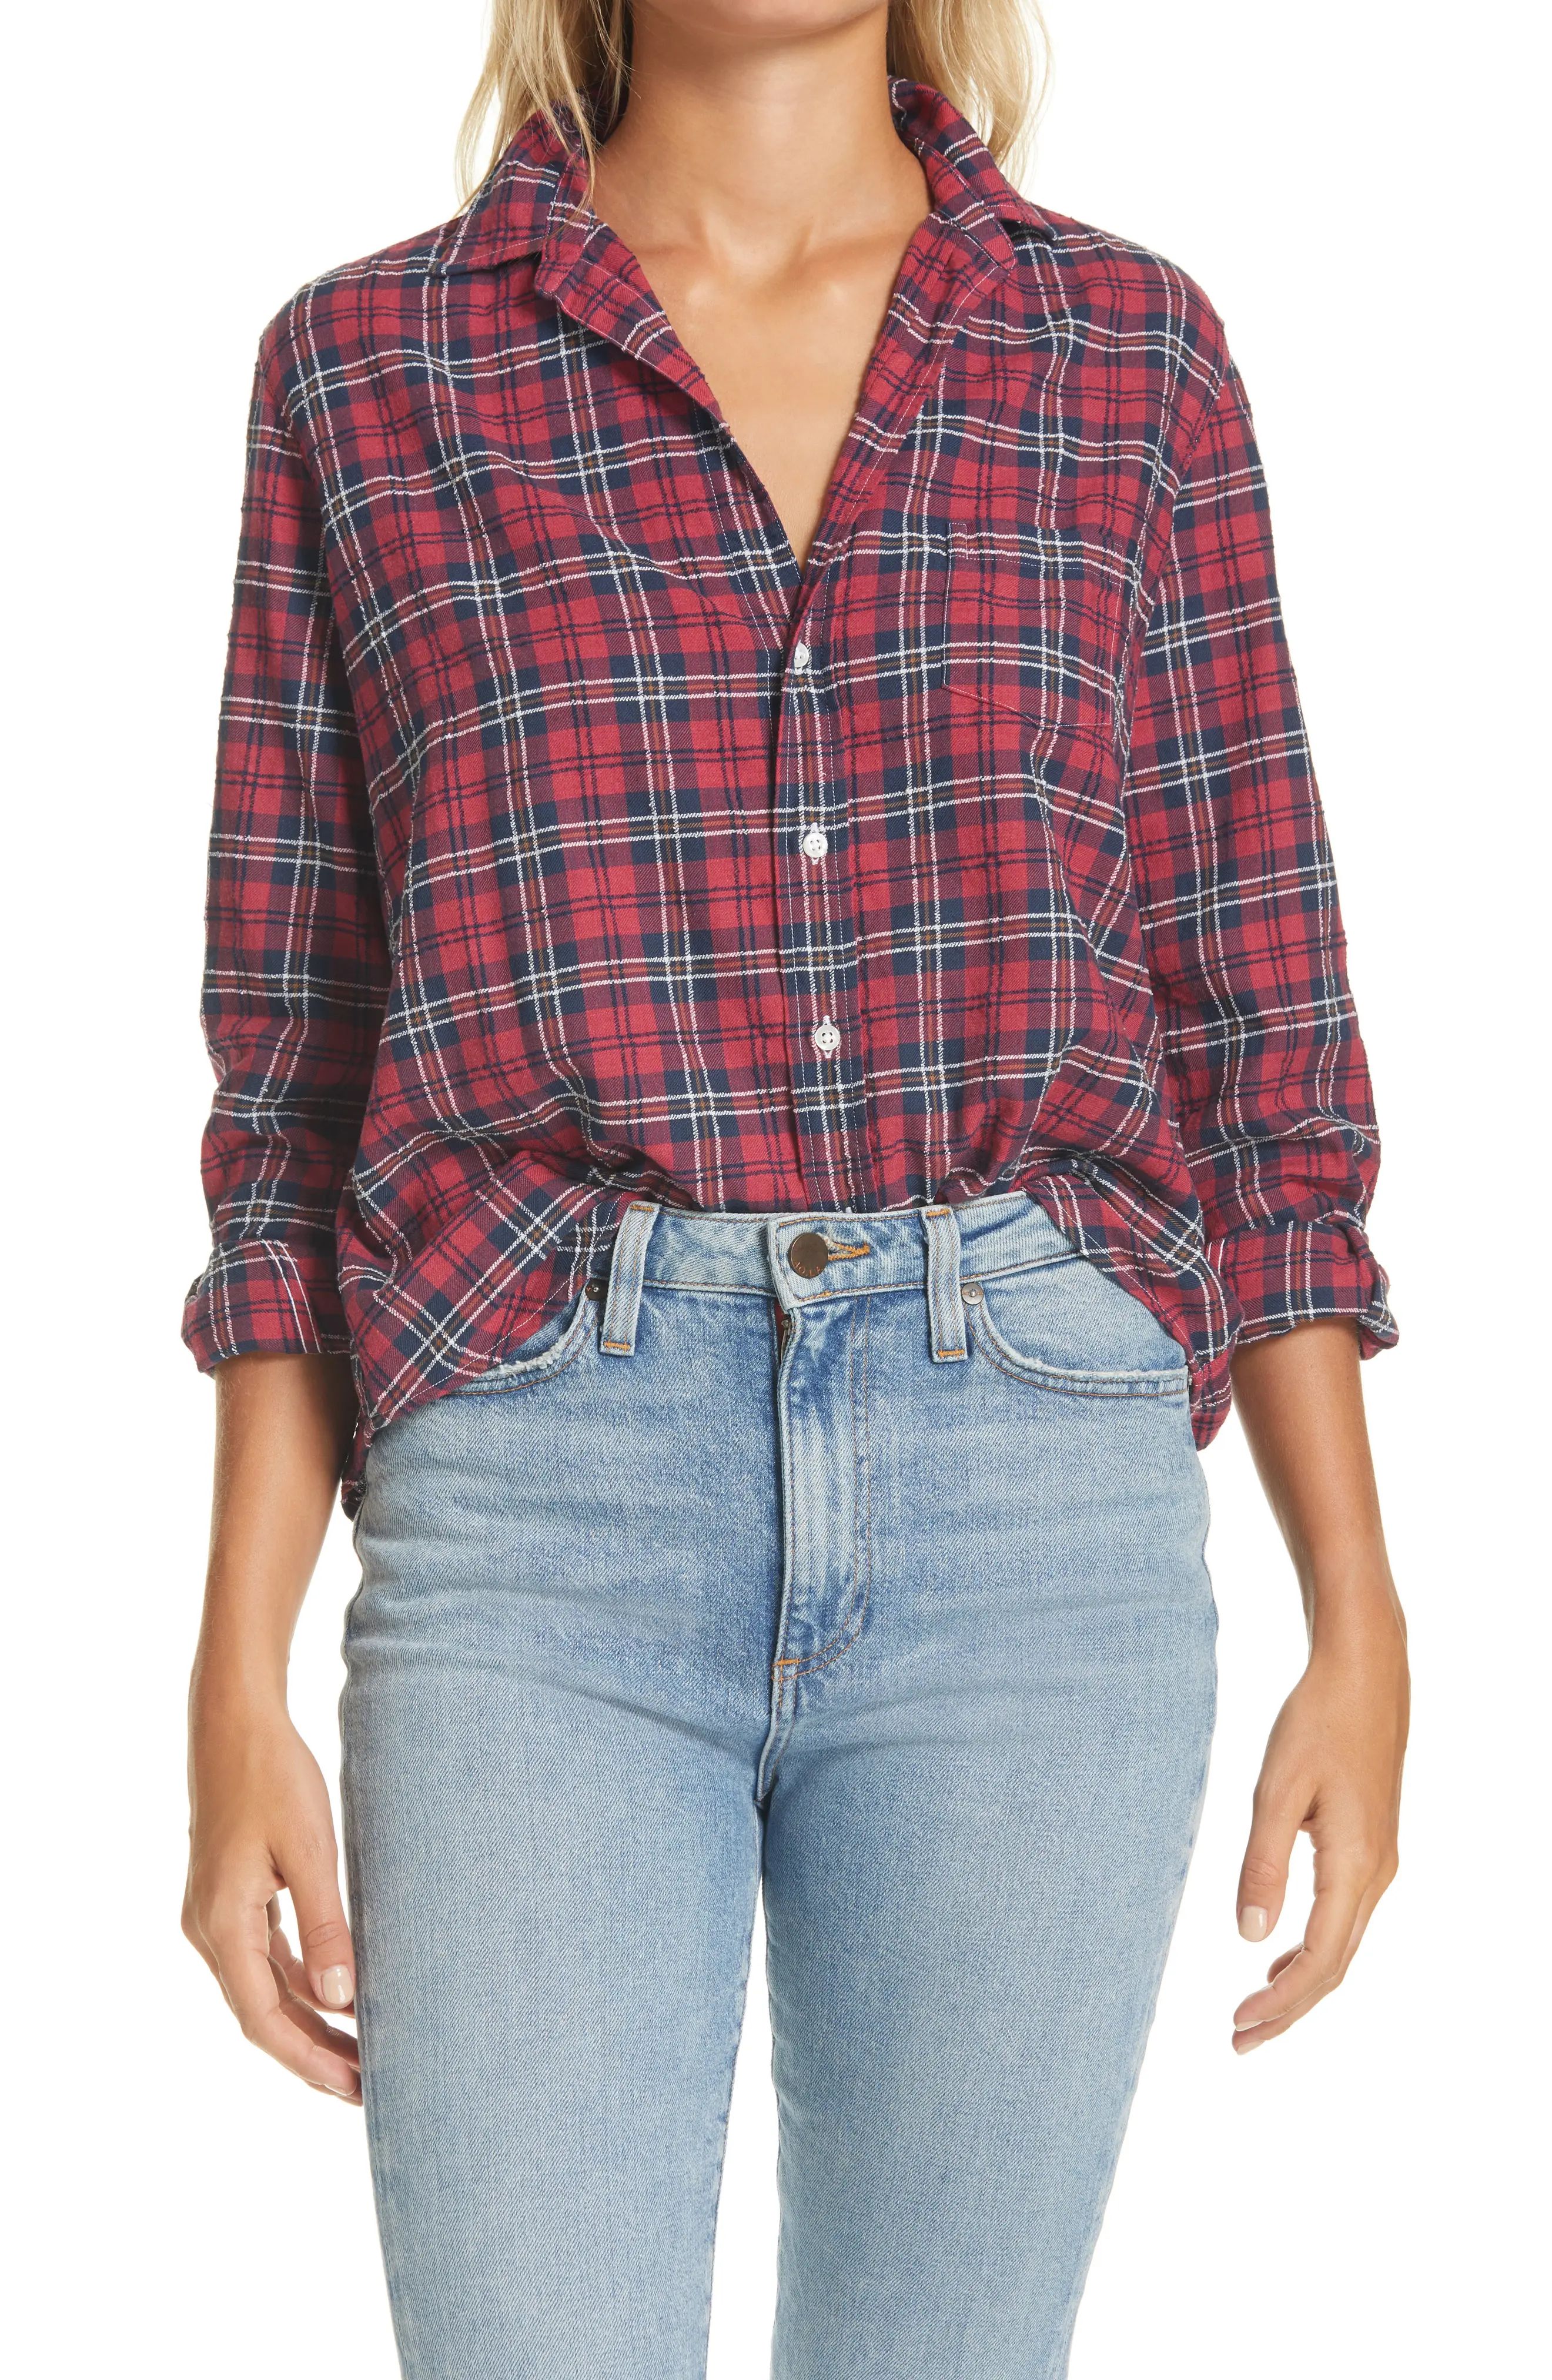 Women's Frank & Eileen California Flannel Shirt, Size Small - Red | Nordstrom